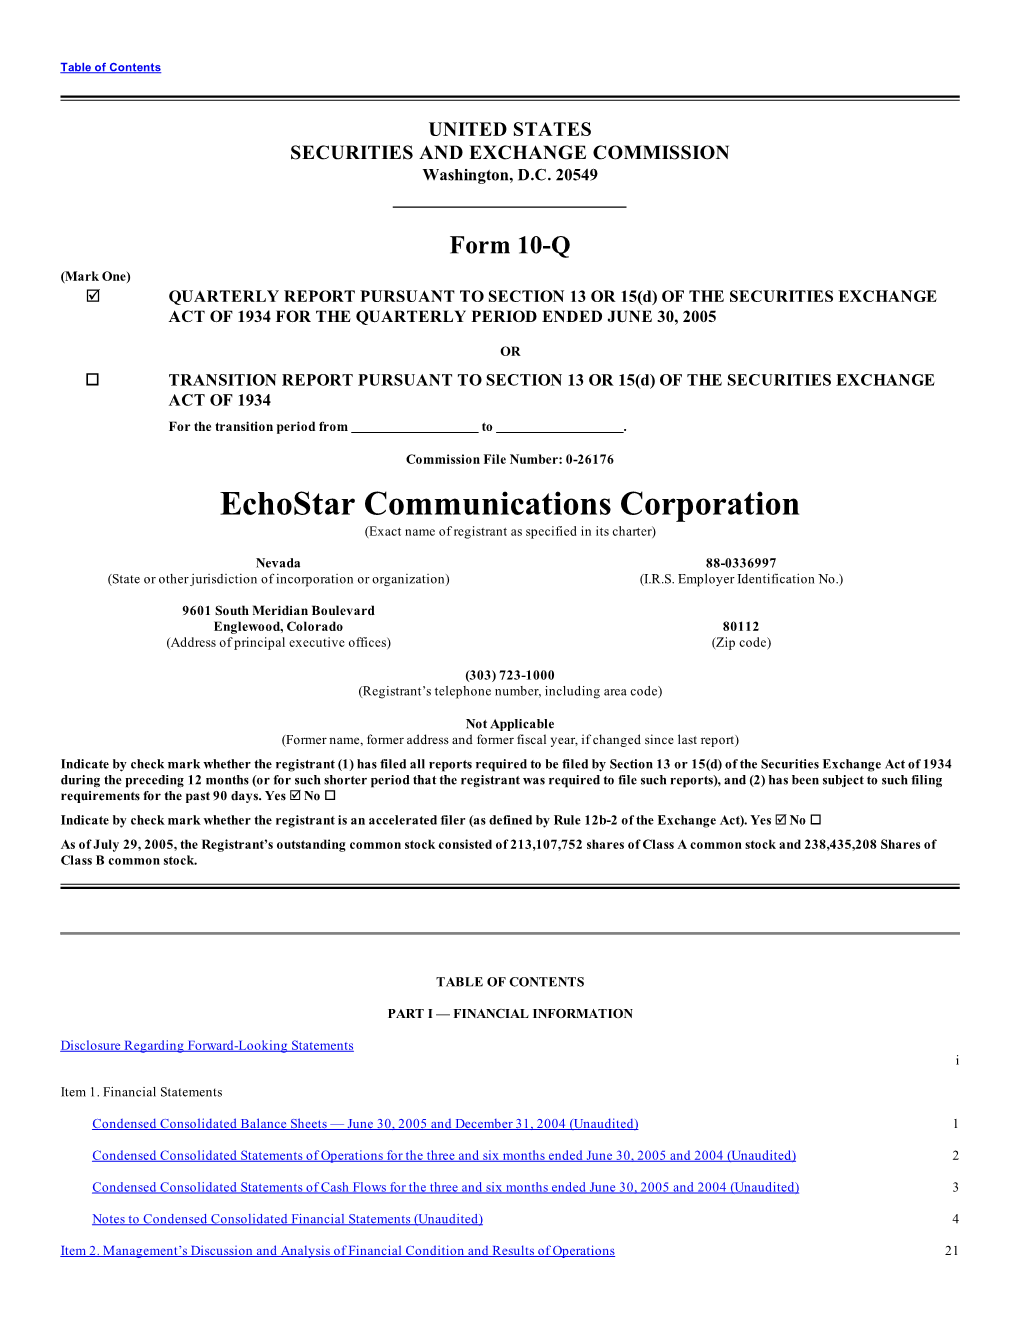 Echostar Communications Corporation (Exact Name of Registrant As Specified in Its Charter)